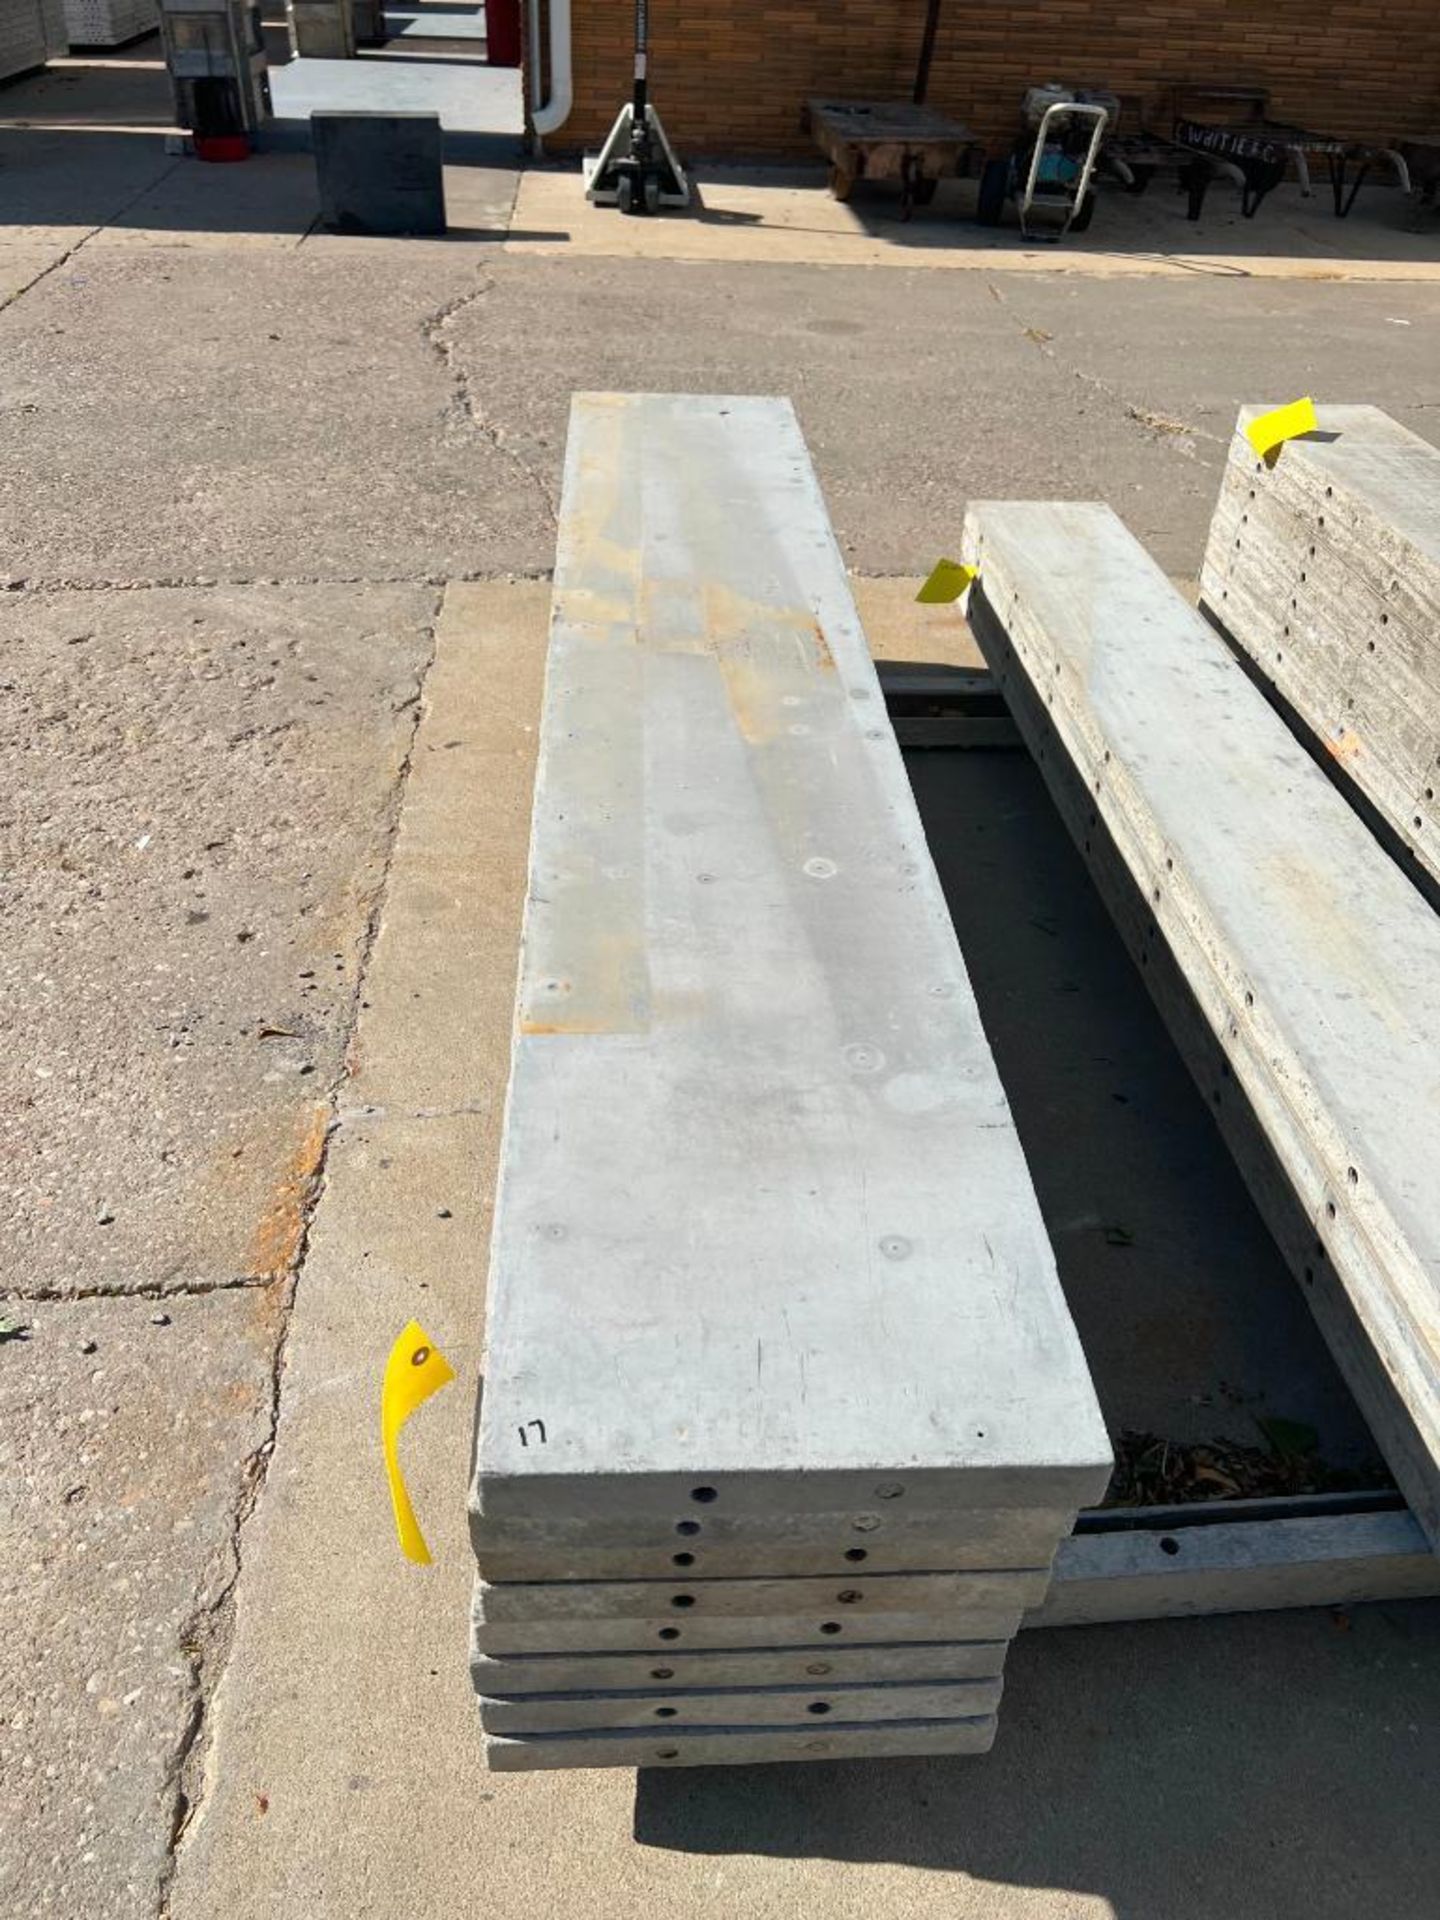 (8) 17" x 8' Wall Ties Smooth Aluminum Concrete Forms, 6-12 Hole Pattern. Located in Mt. Pleasant, I